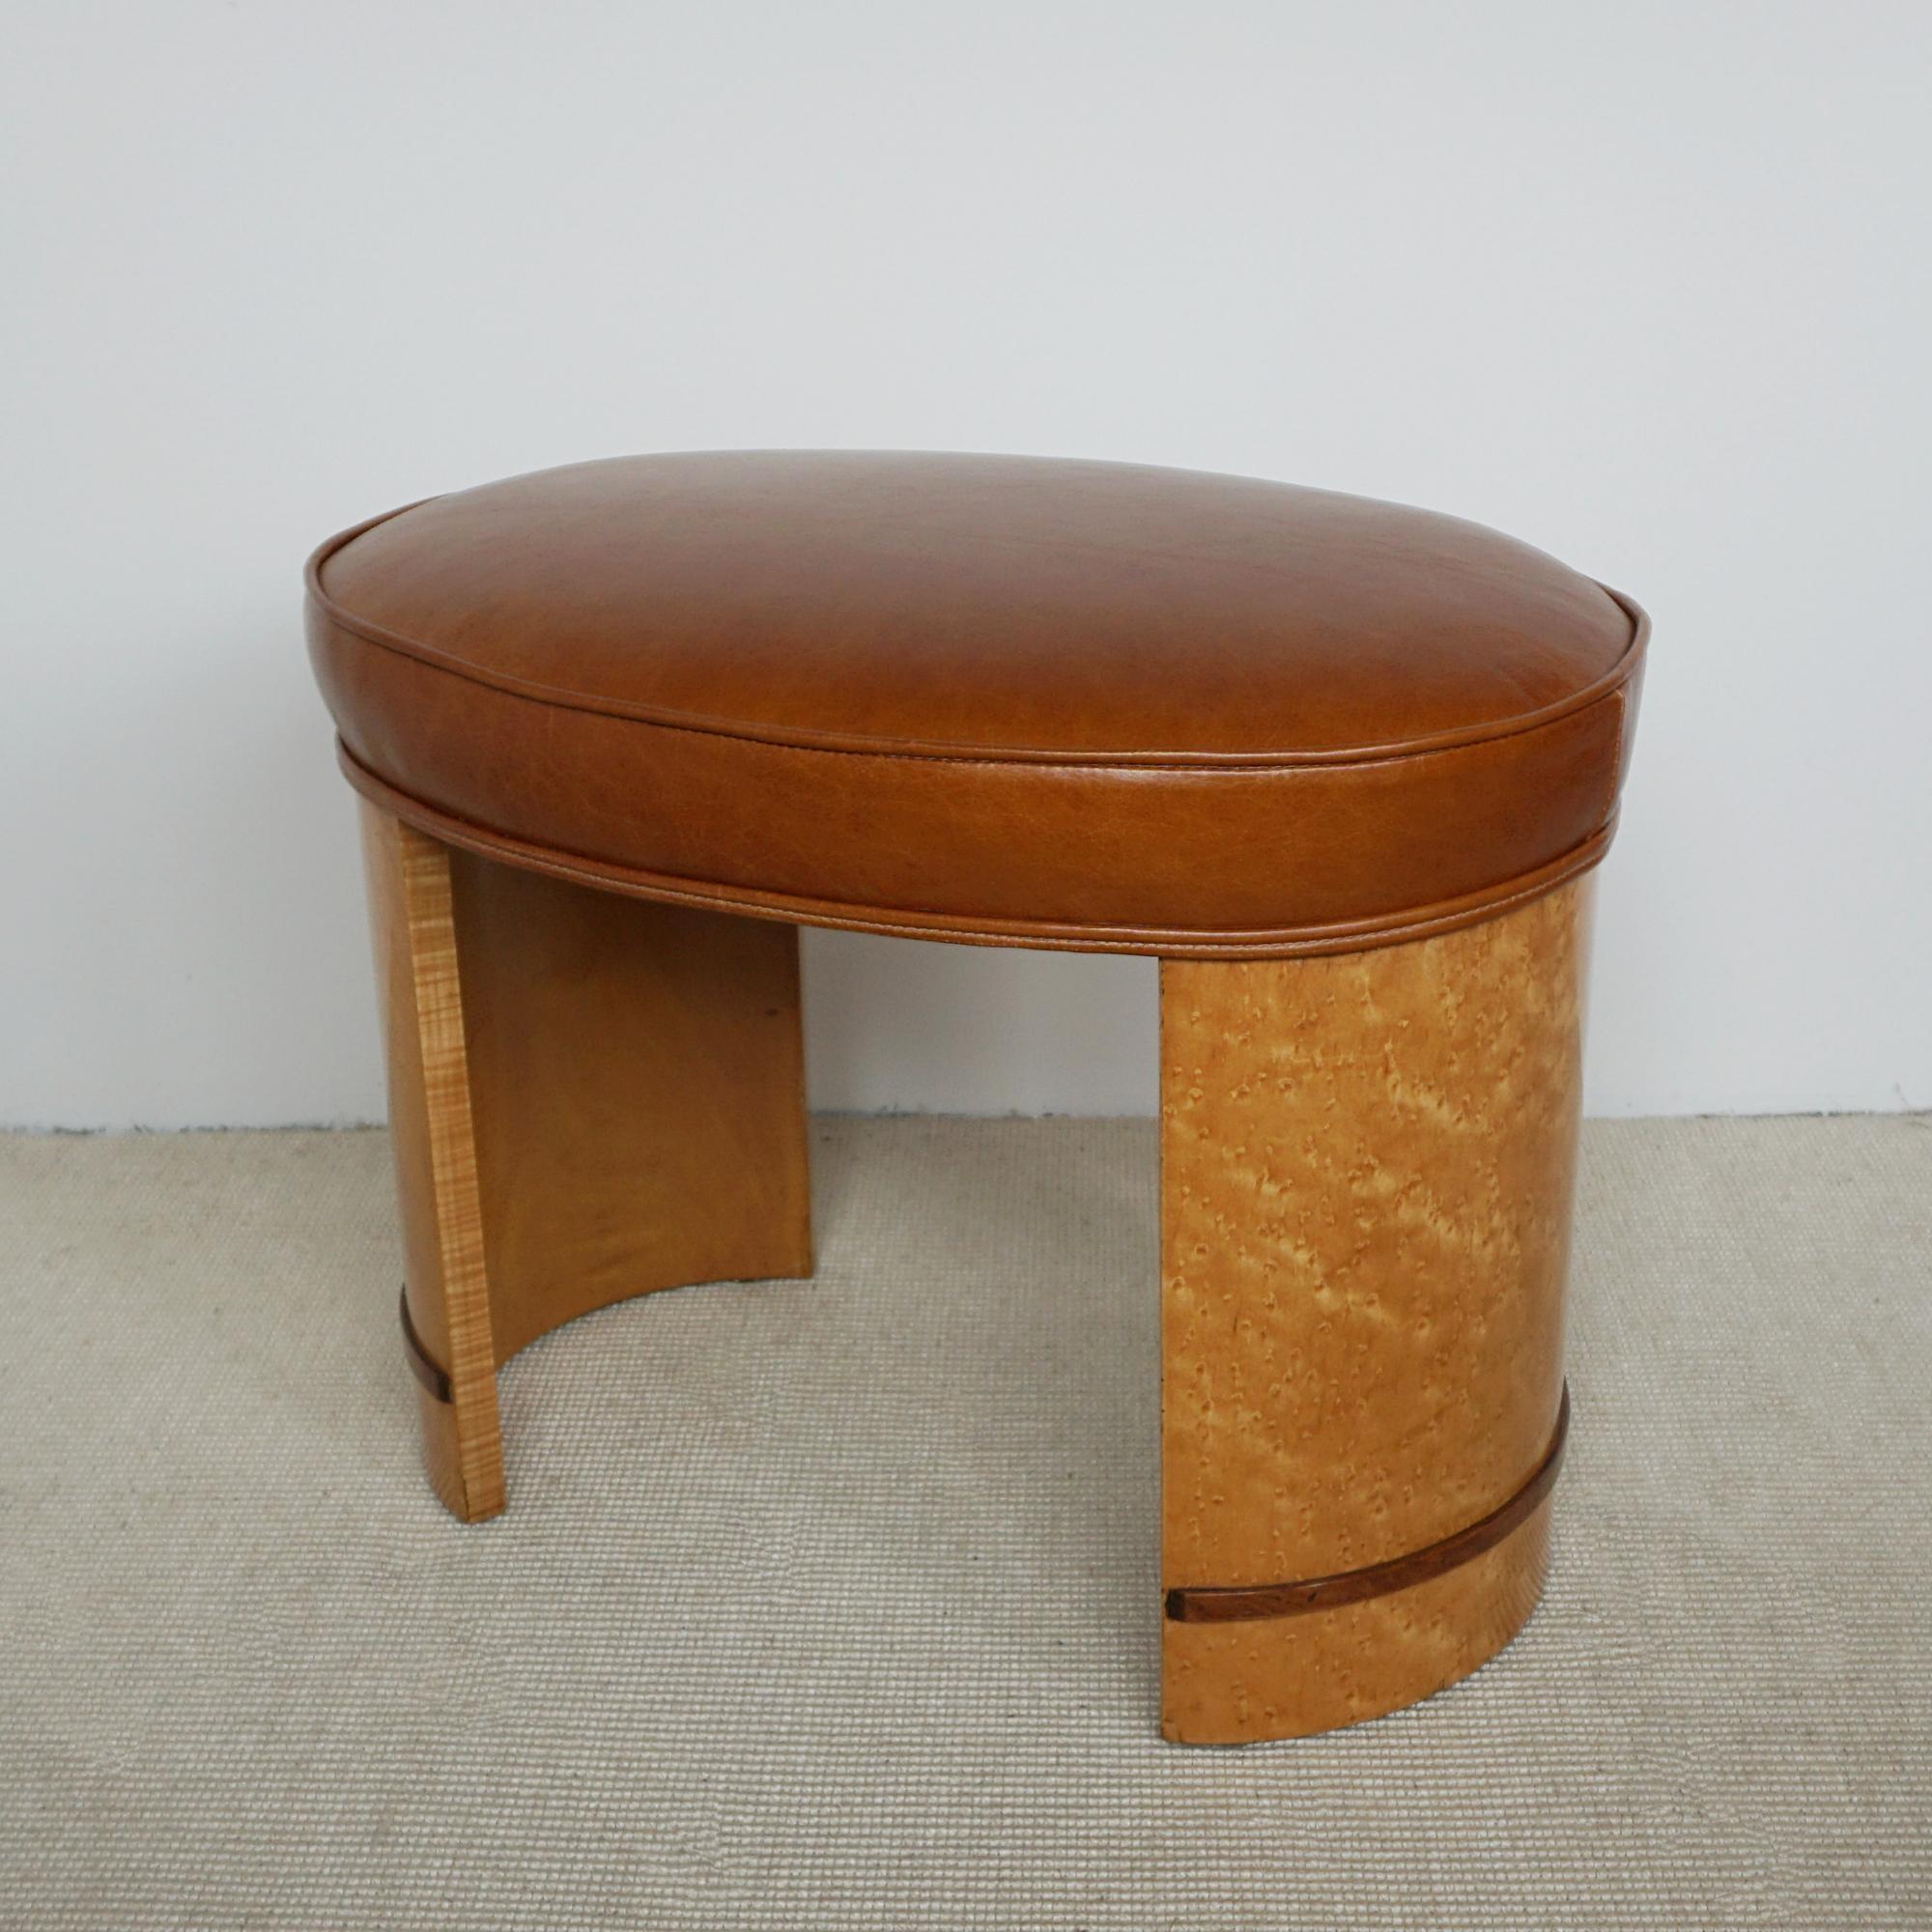 An Art Deco stool. Birdseye maple veneered with walnut banding. Re-upholstered in brown leather. 

All of our furniture is extensively polished and restored where necessary to the highest standards.